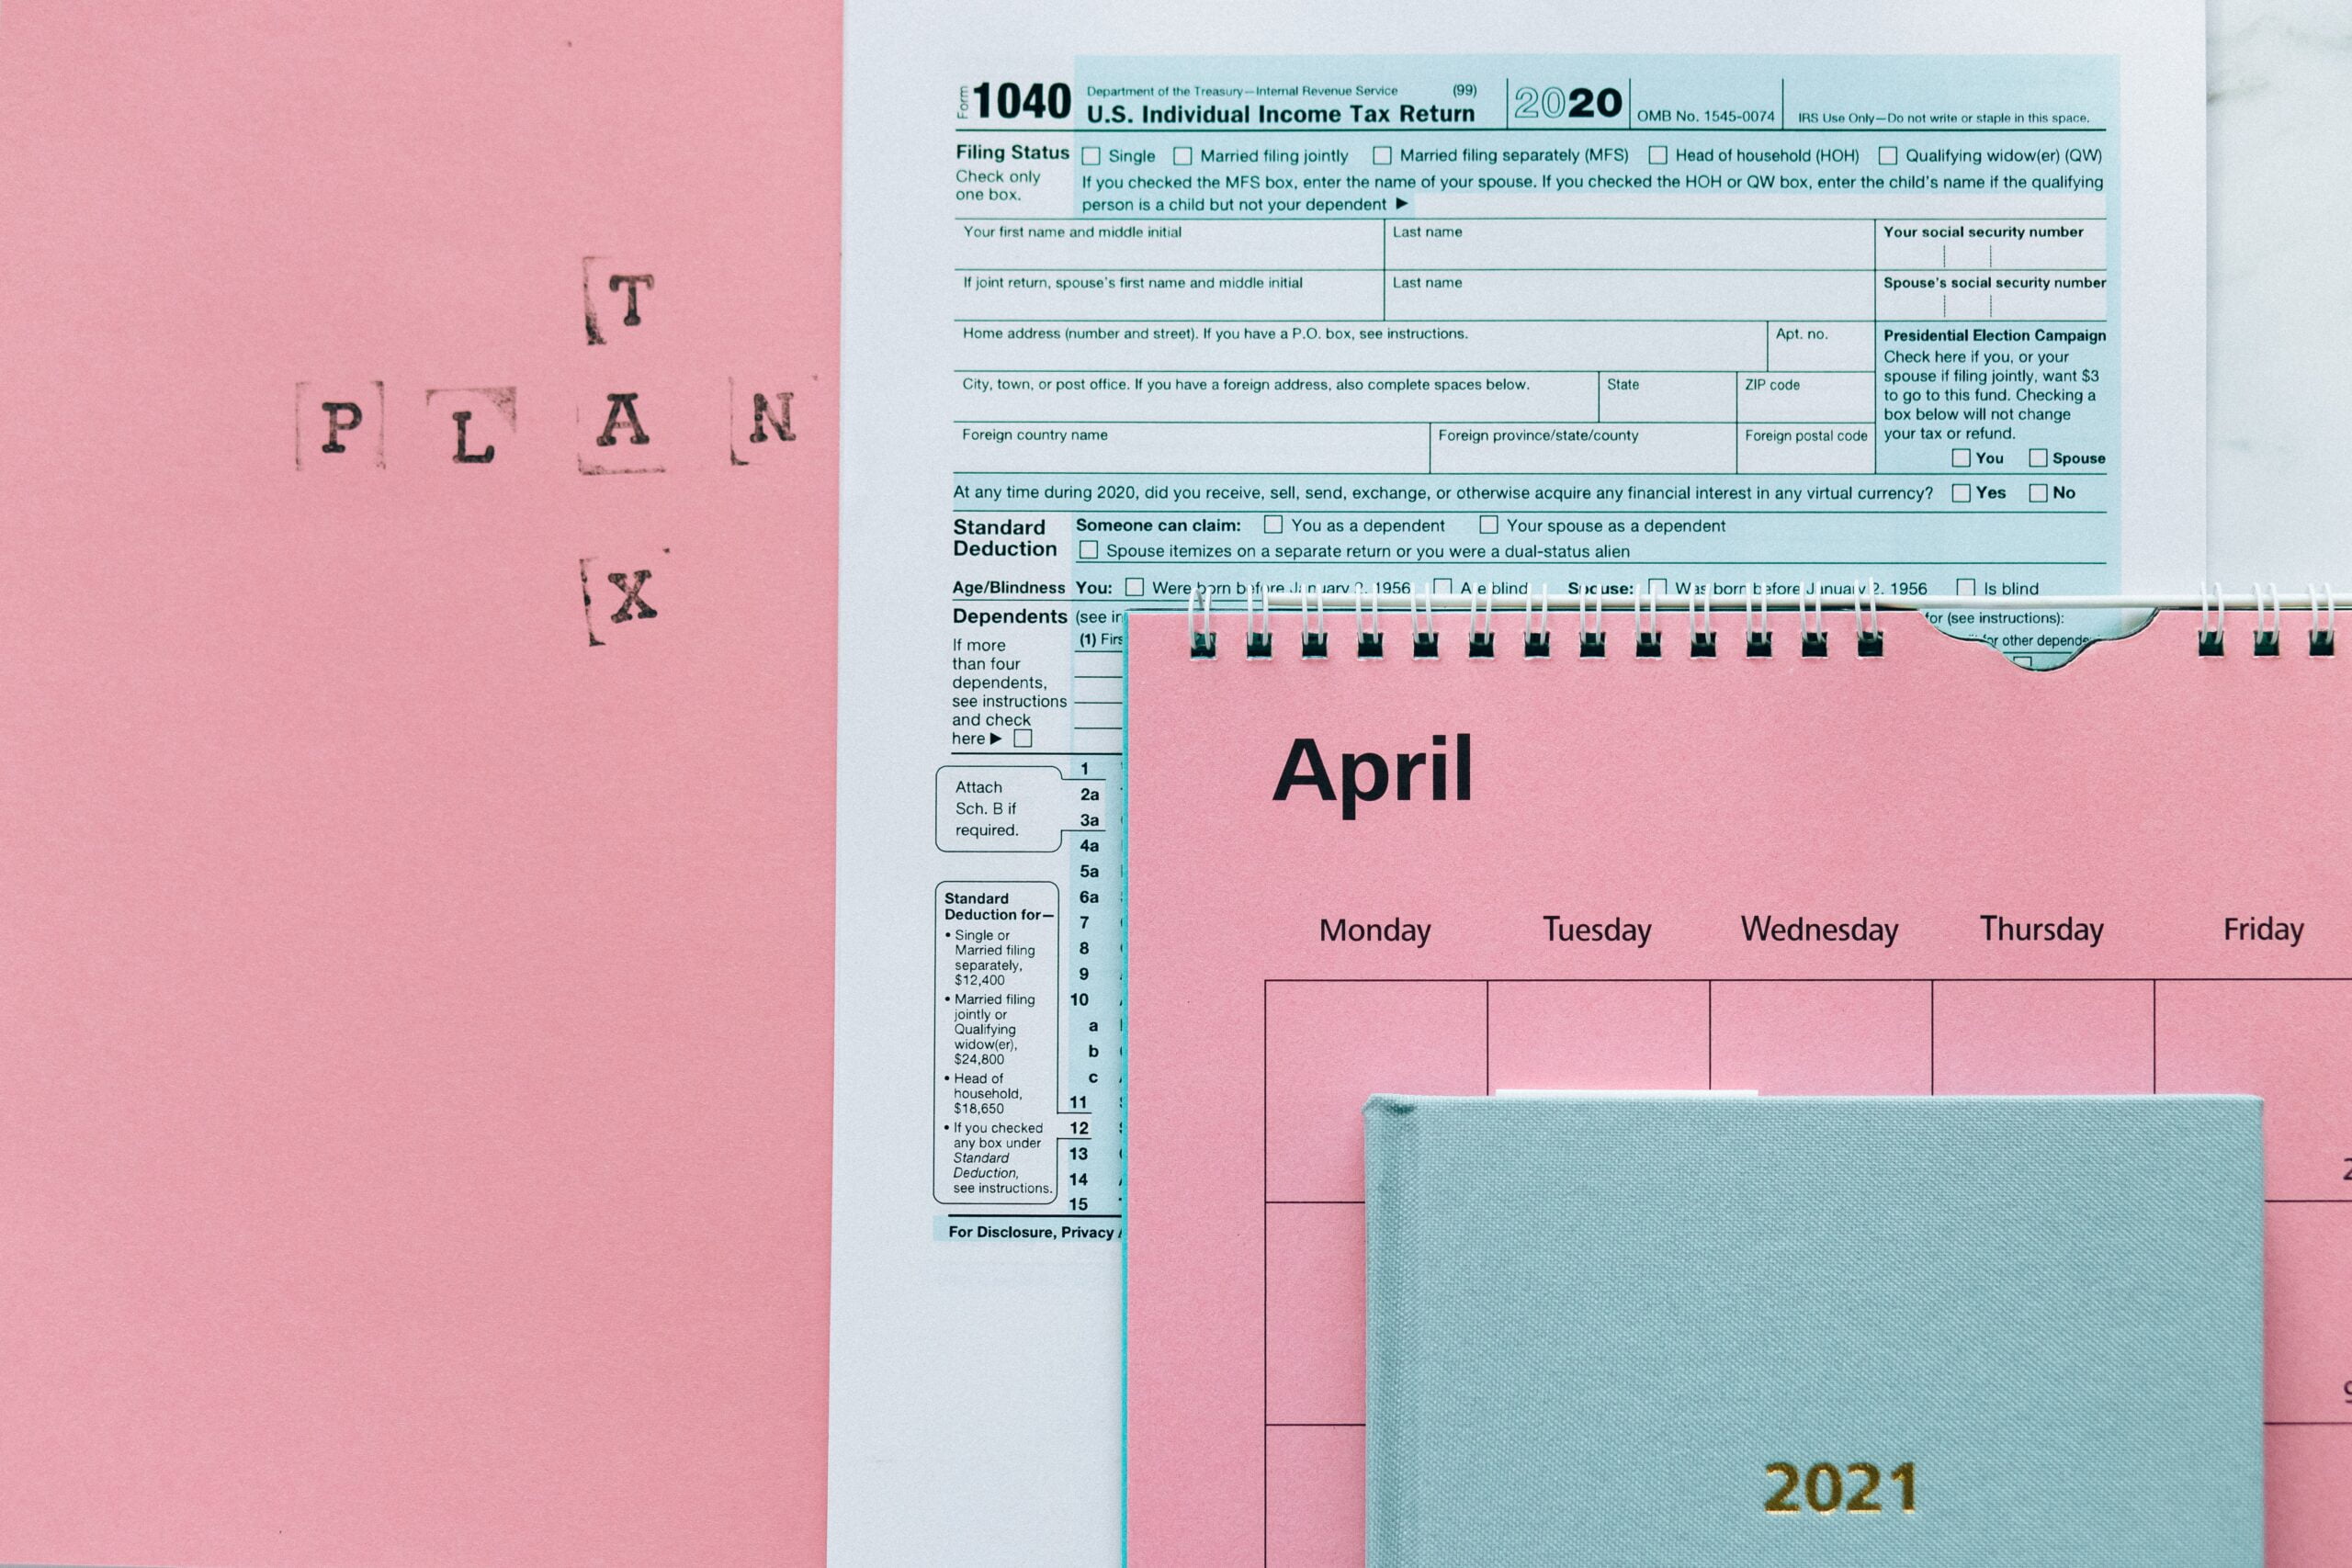 Image showing a tax return form and 2021 planner on pink surface